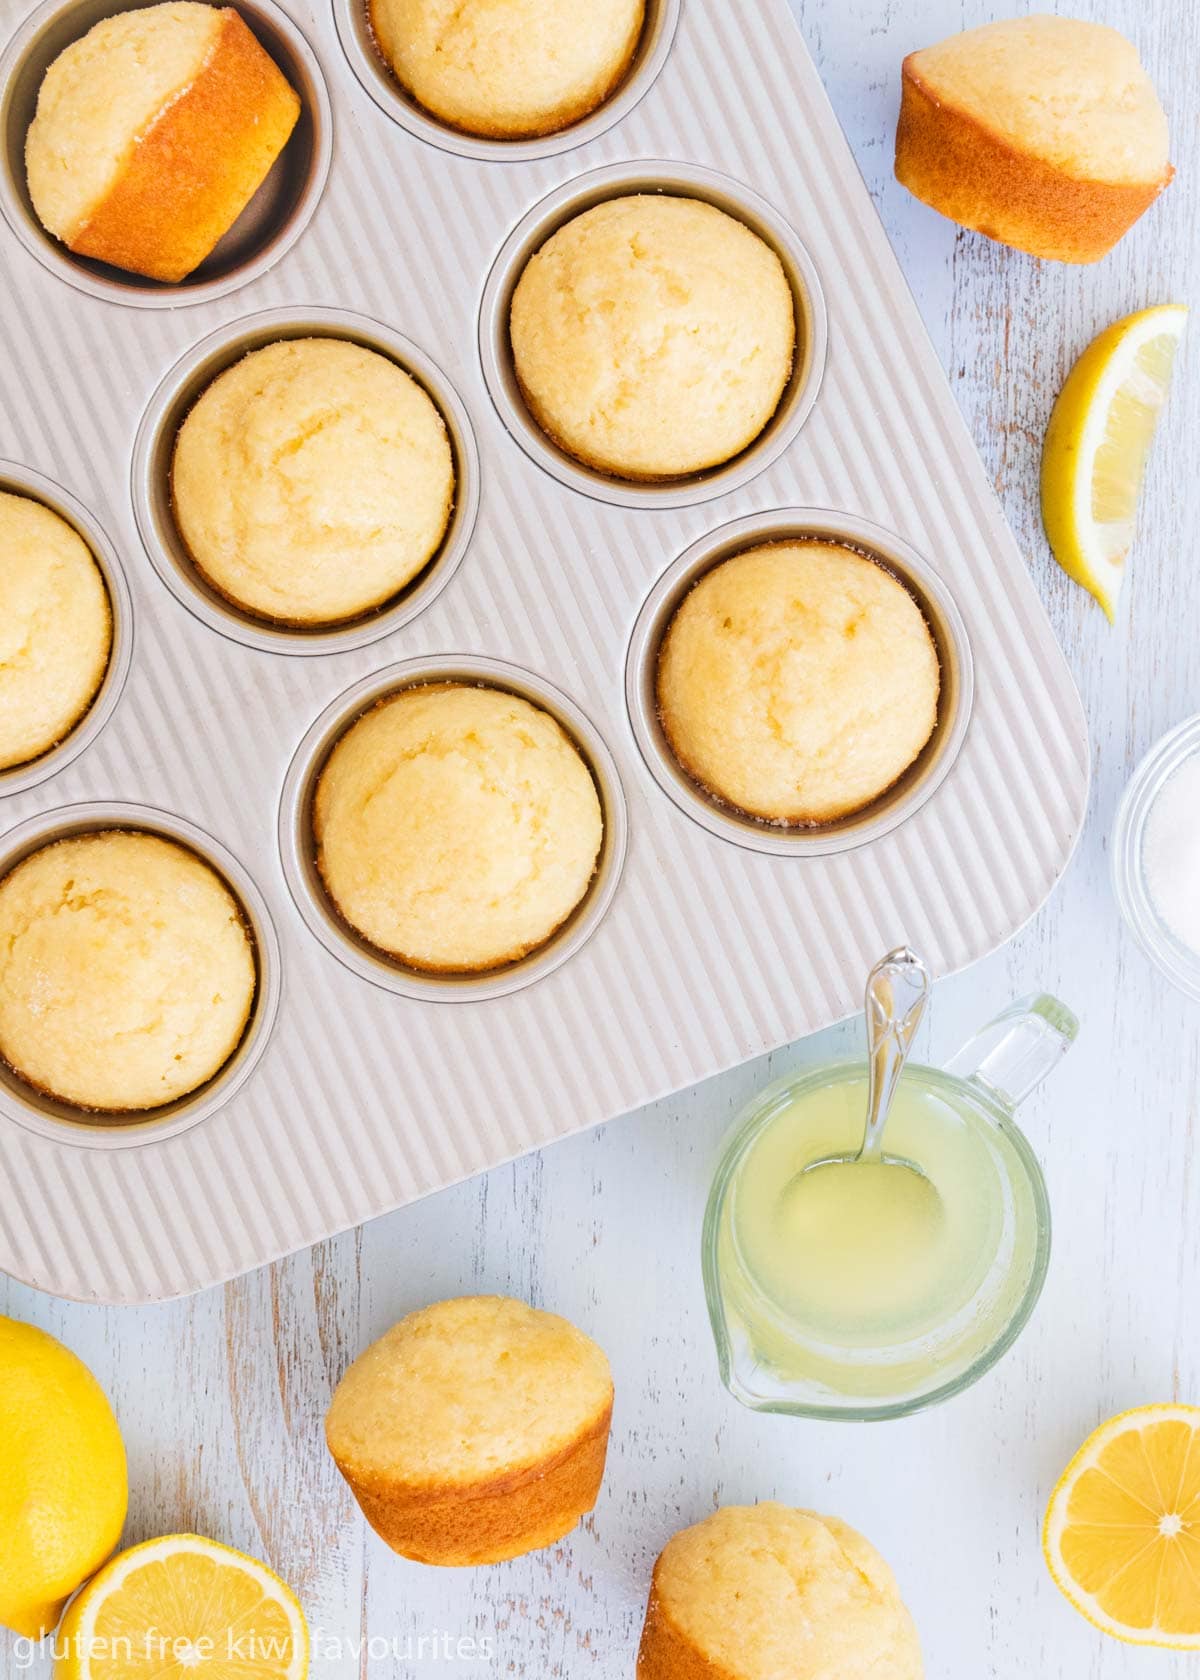 GF crunchy lemon muffins in a silver muffin tin, with a small glass jug of syrup, and sliced lemons on a blue background.